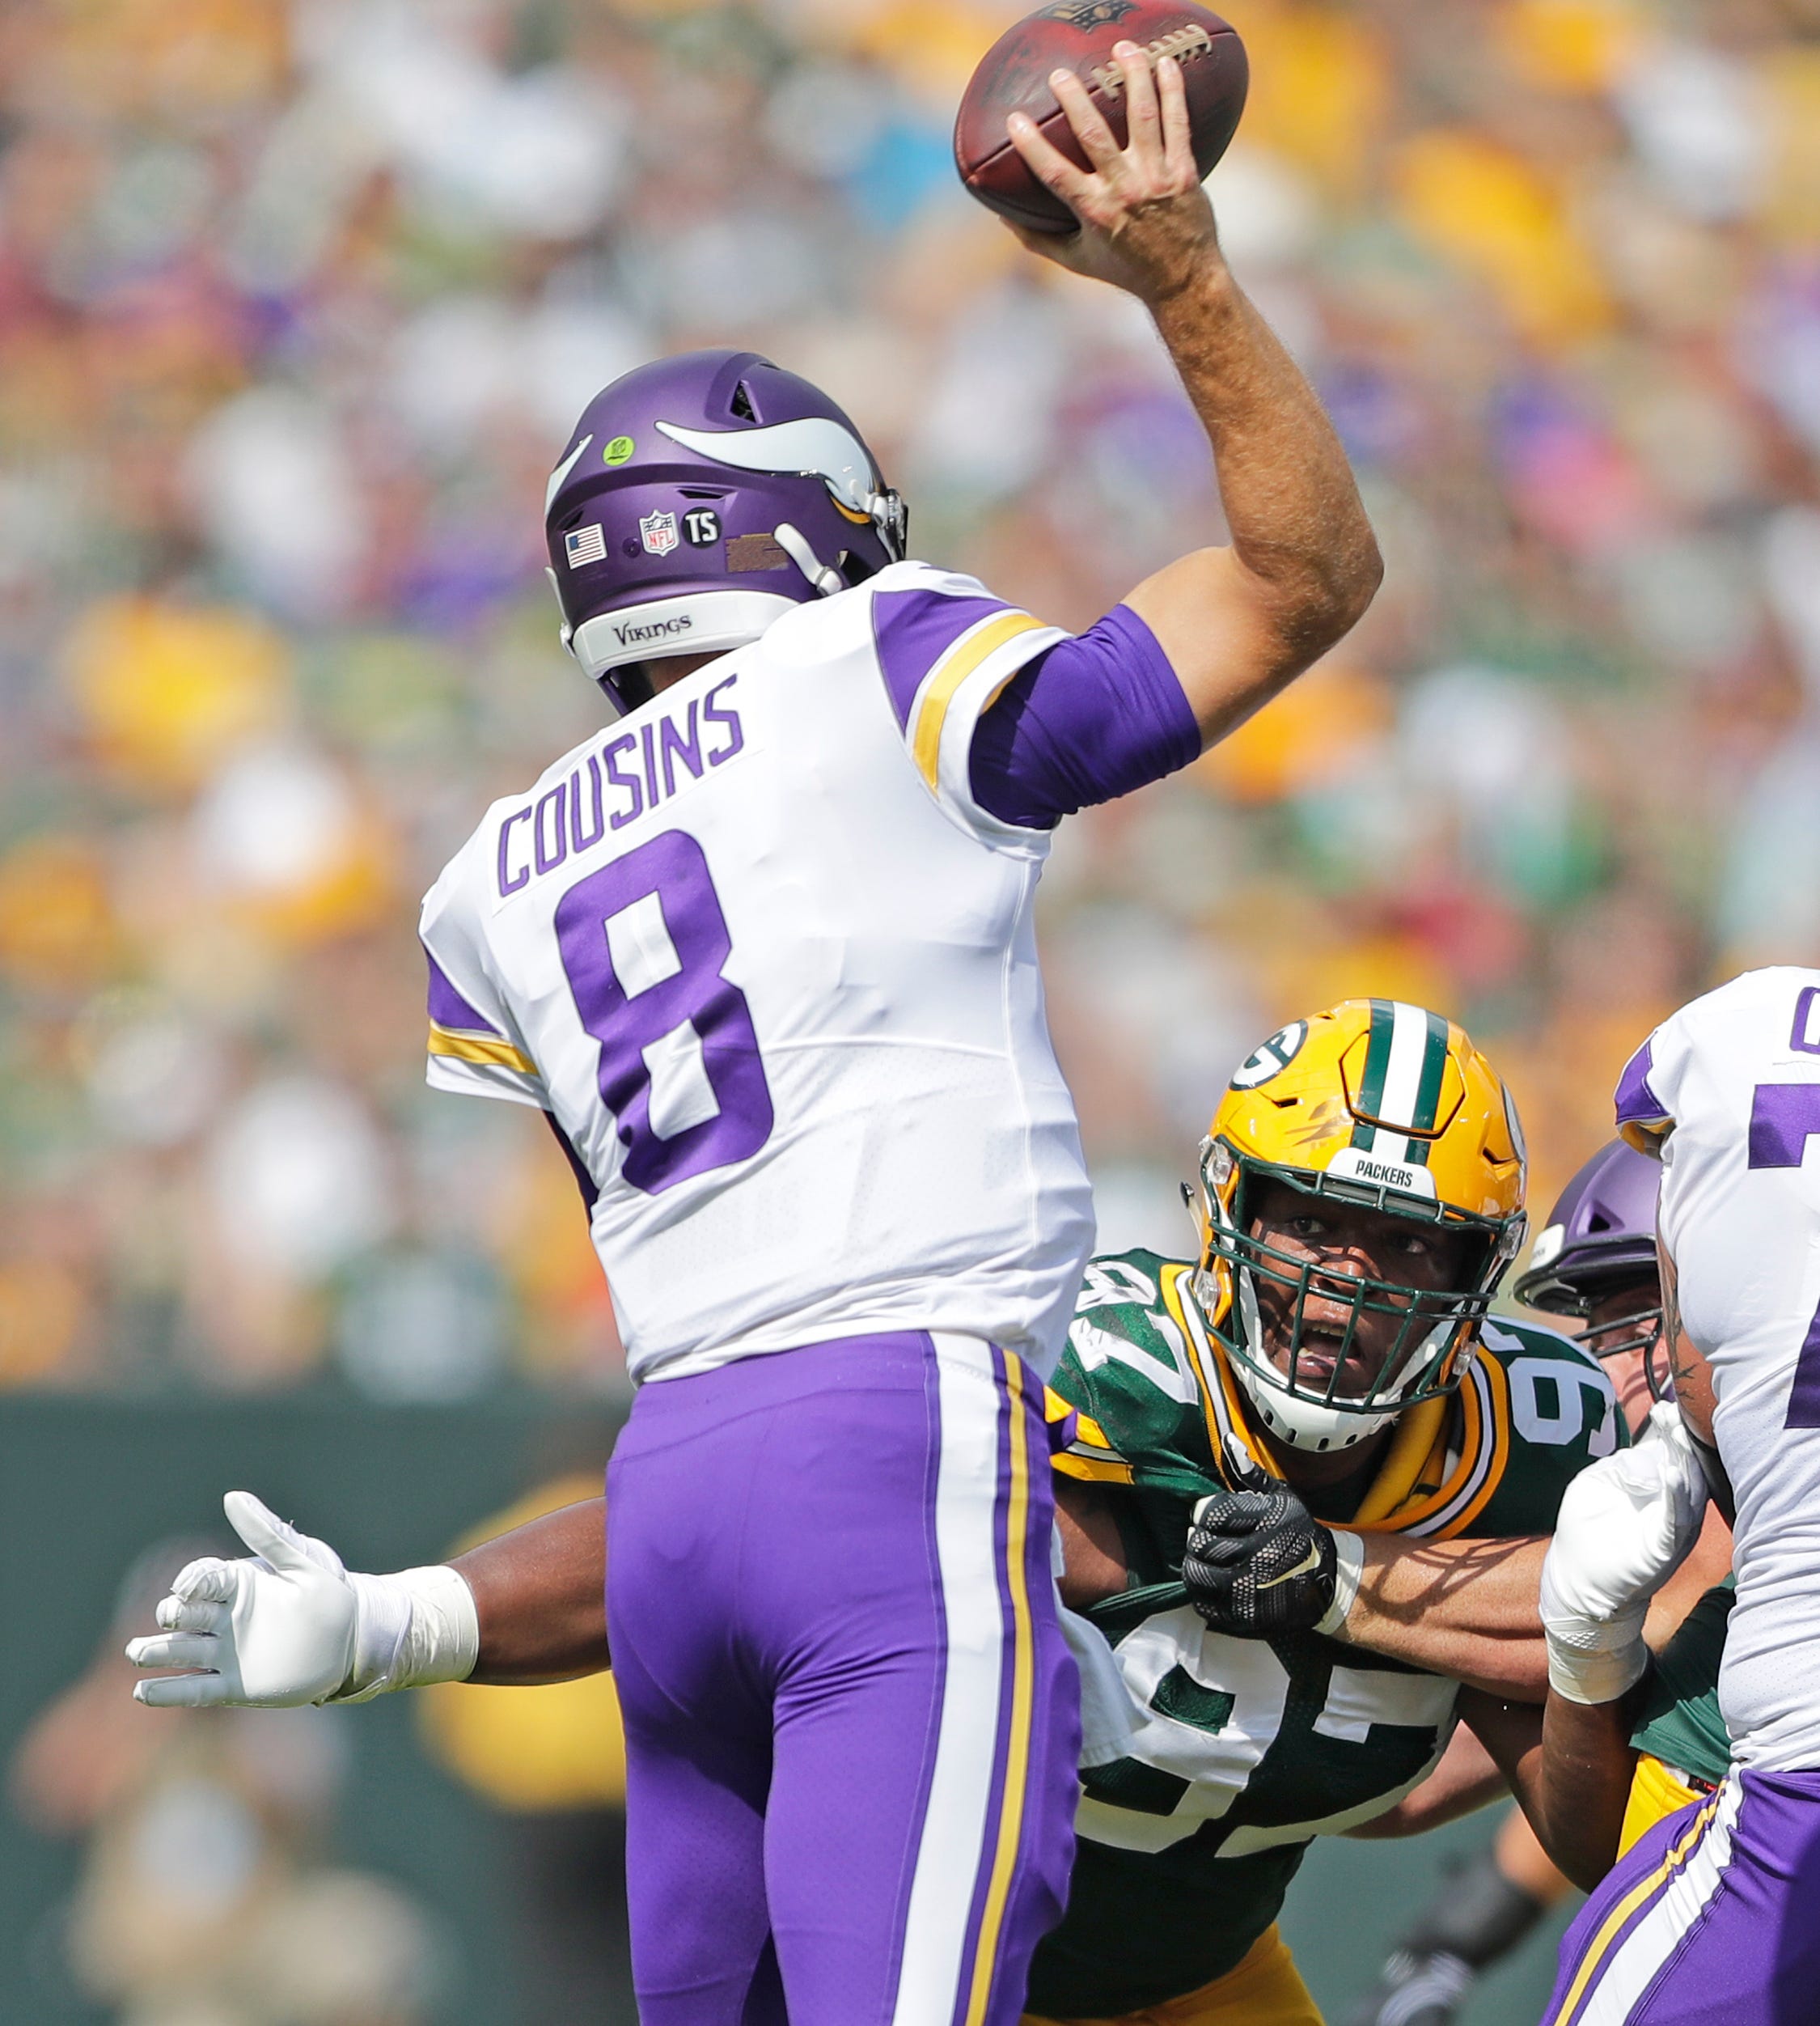 Green Bay Packers nose tackle Kenny Clark (97) pressures Minnesota Vikings quarterback Kirk Cousins (8) at Lambeau Field on Sunday, September 16, 2018 in Green Bay, Wis.
Adam Wesley/USA TODAY NETWORK-Wisconsin